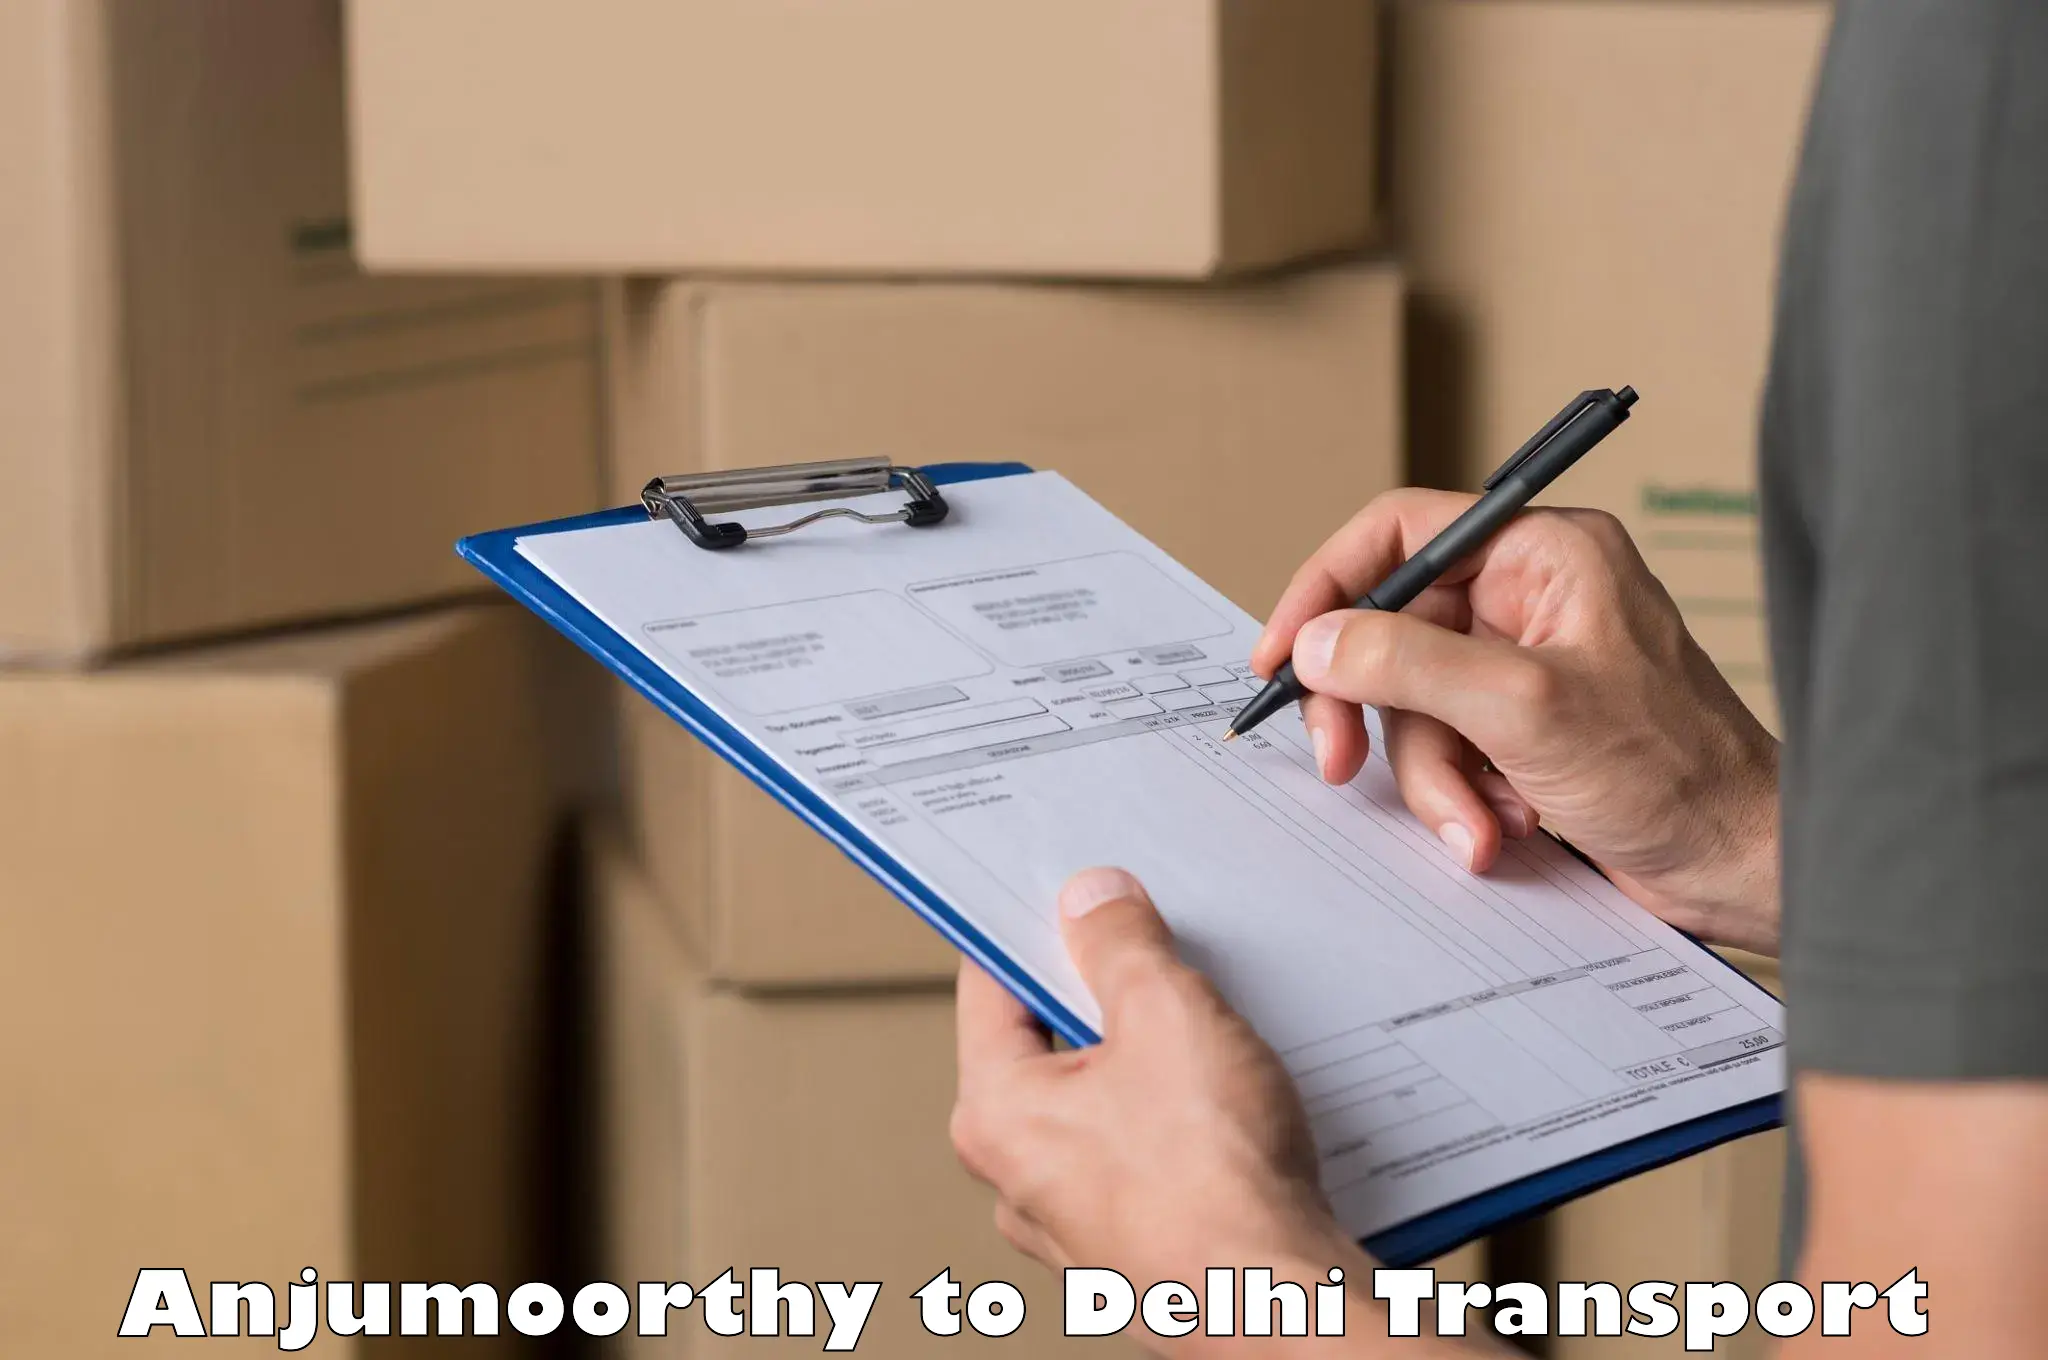 Package delivery services Anjumoorthy to Naraina Industrial Estate